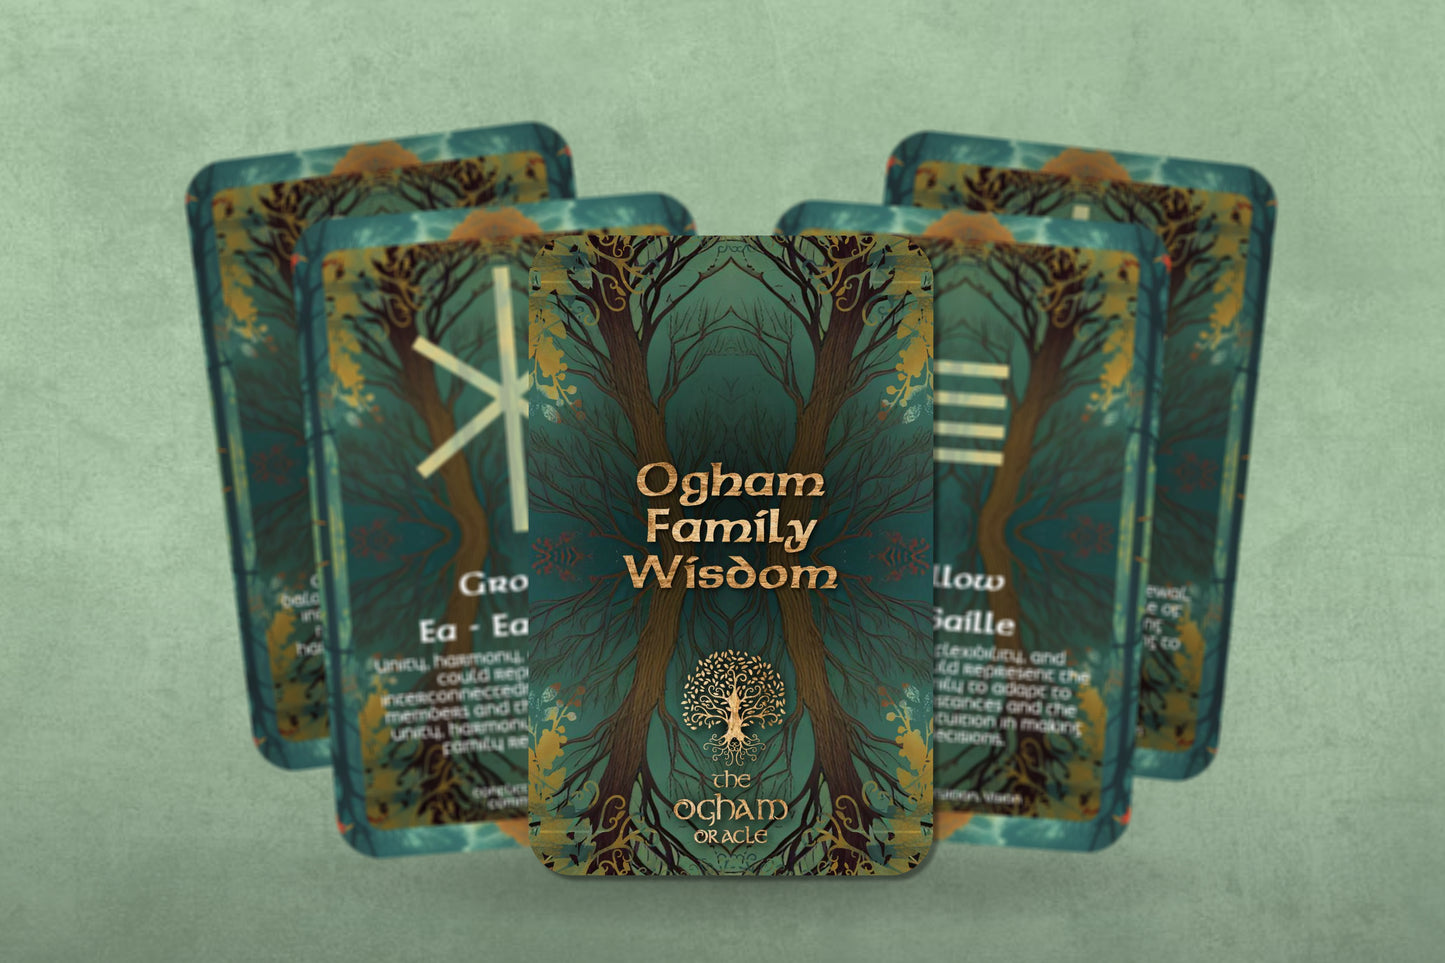 Ogham Family Wisdom - The Ogham Oracle